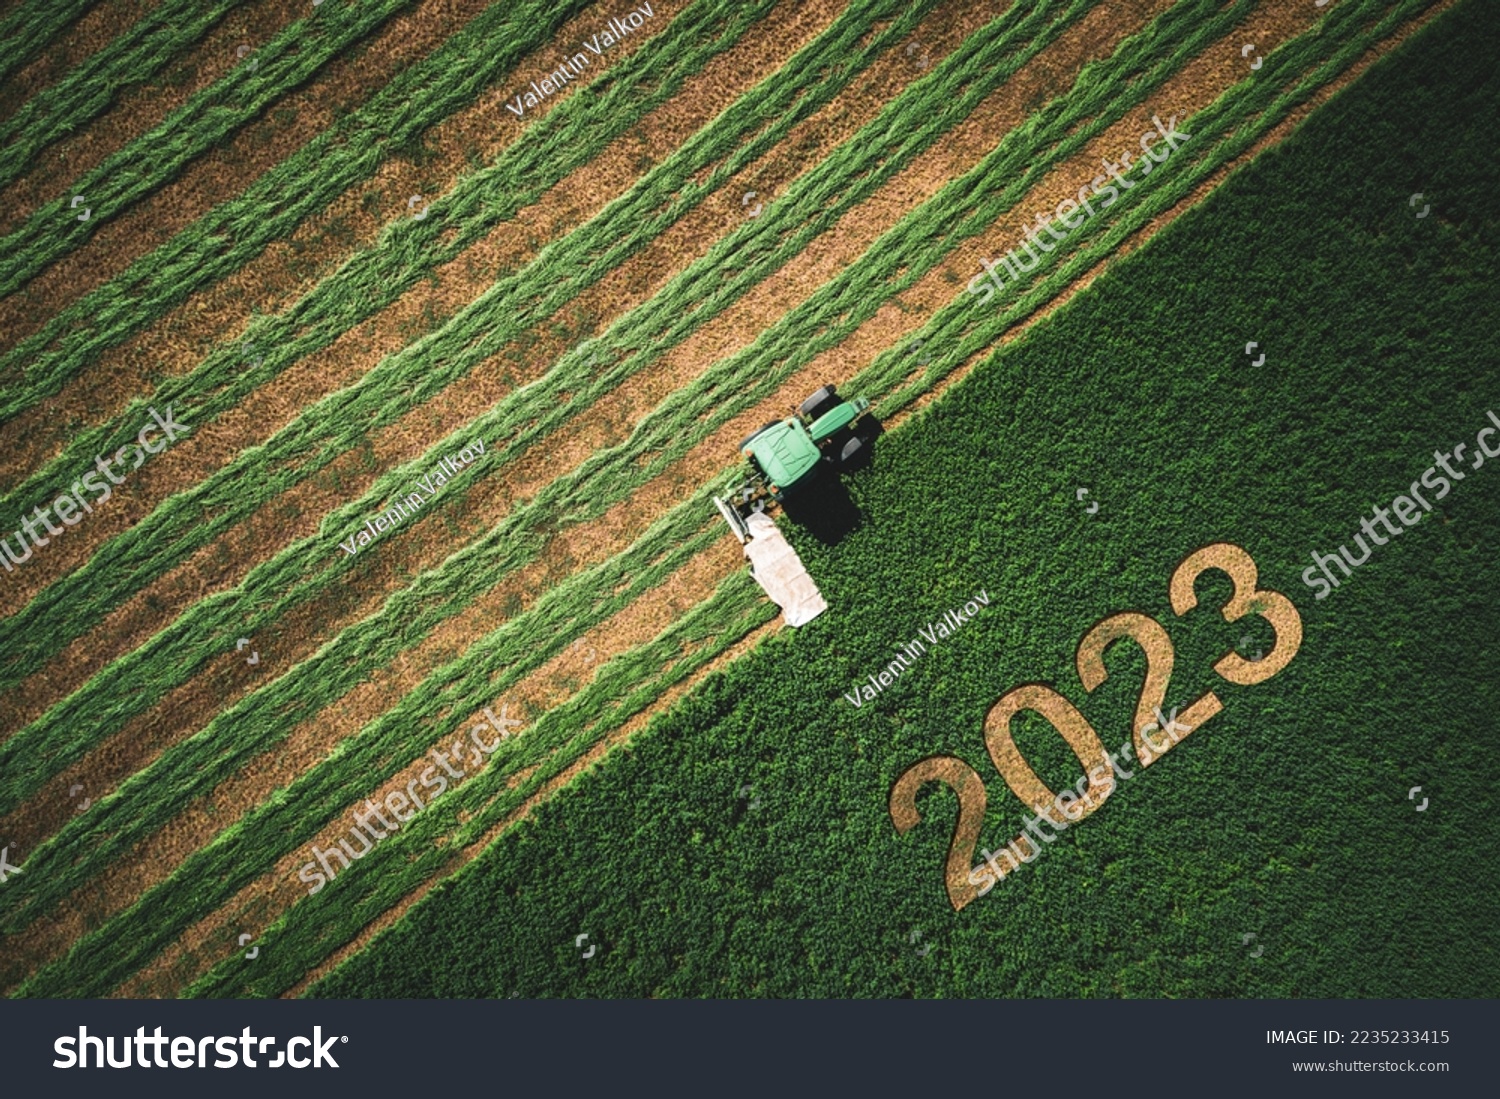 2023 Happy New year concept for agriculture, business, goals, success and new start banner. Industrial tractor on a green field. #2235233415